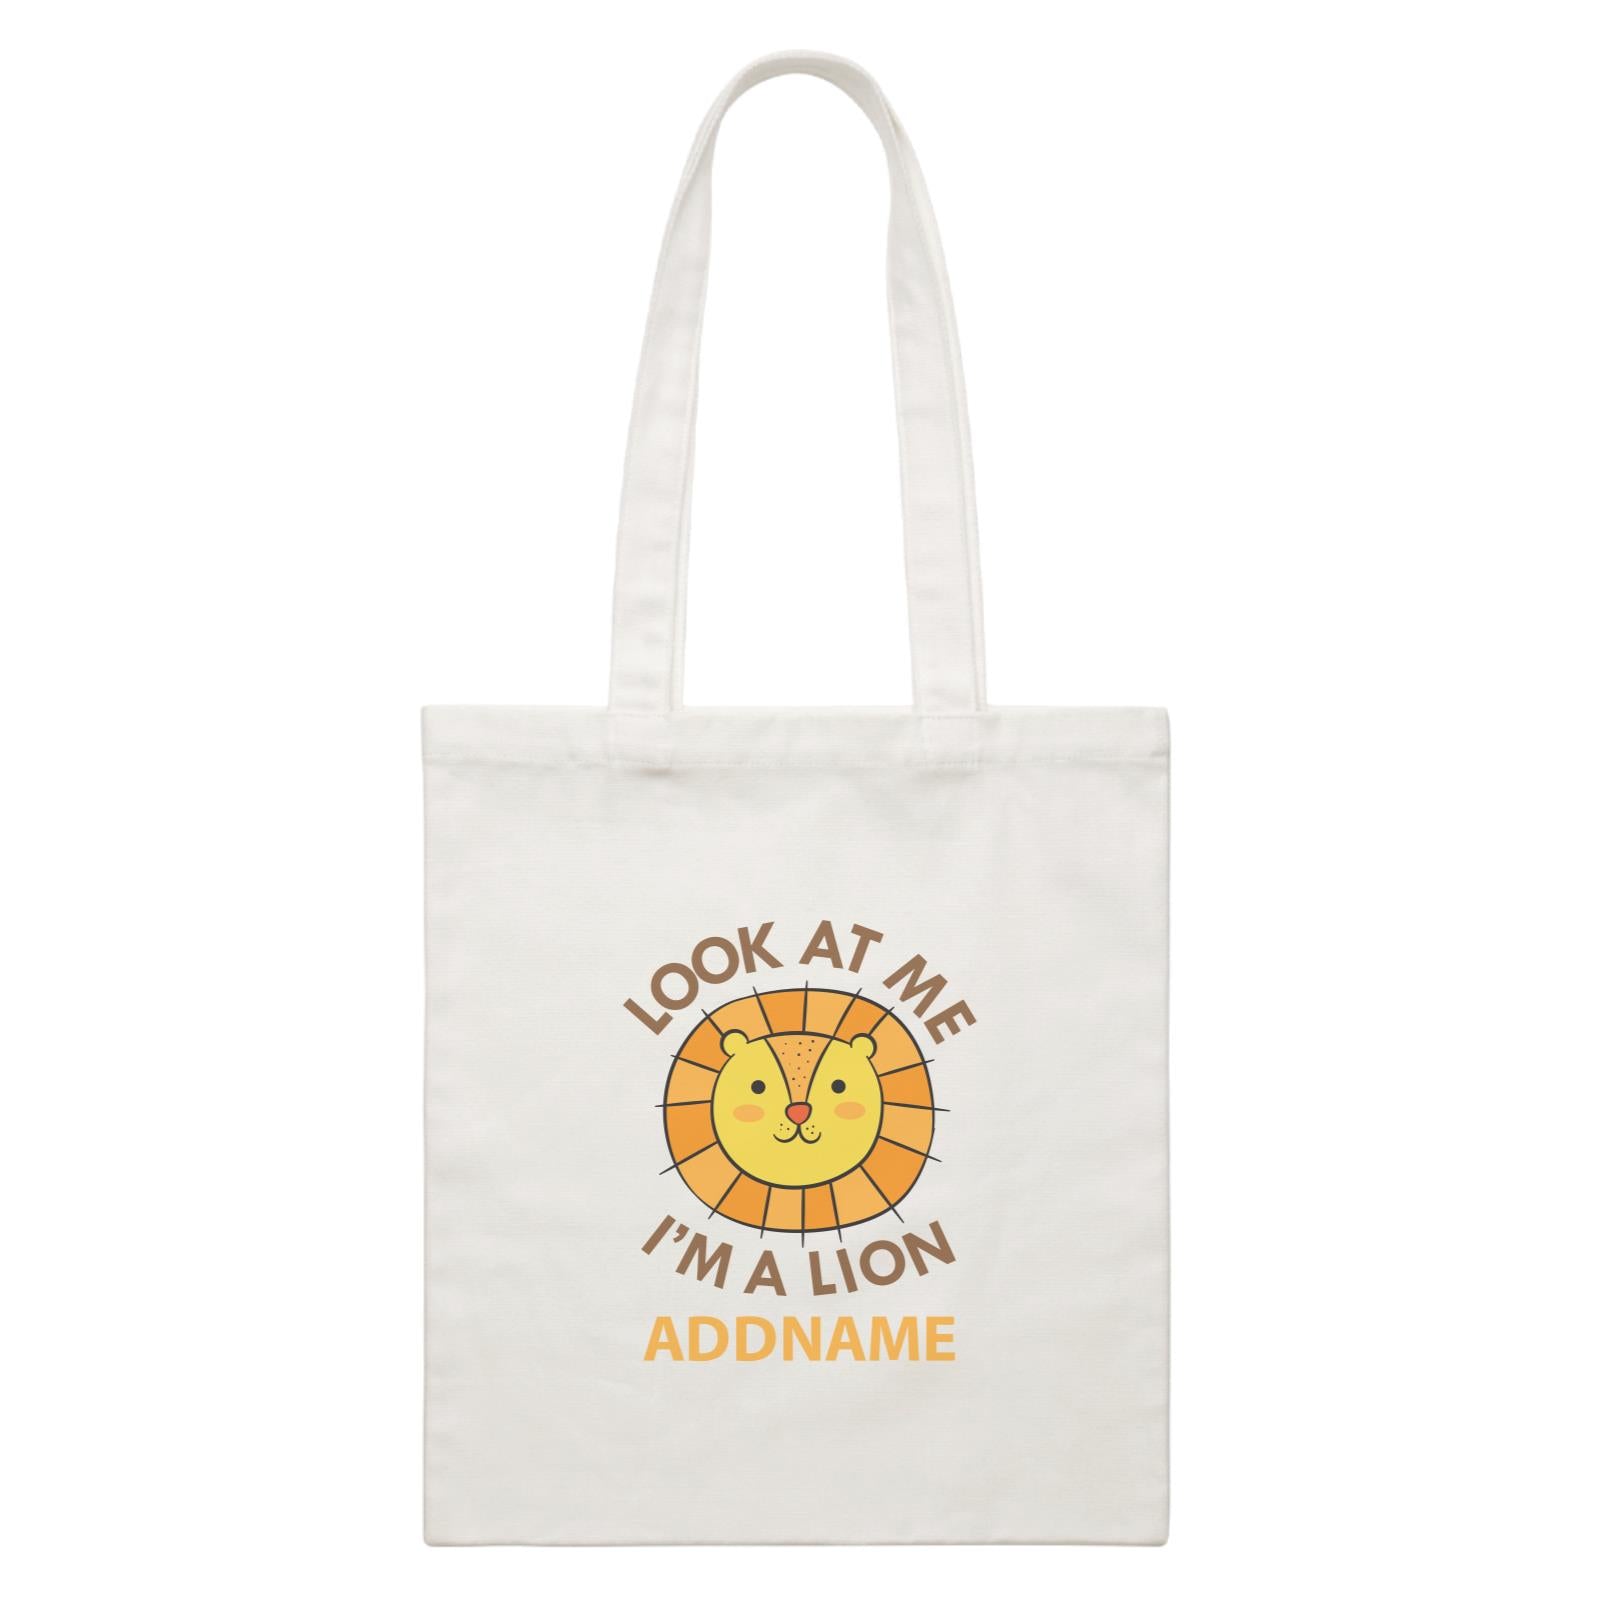 Cool Cute Animals Lion Look At Me I'm A Lion Addname White Canvas Bag